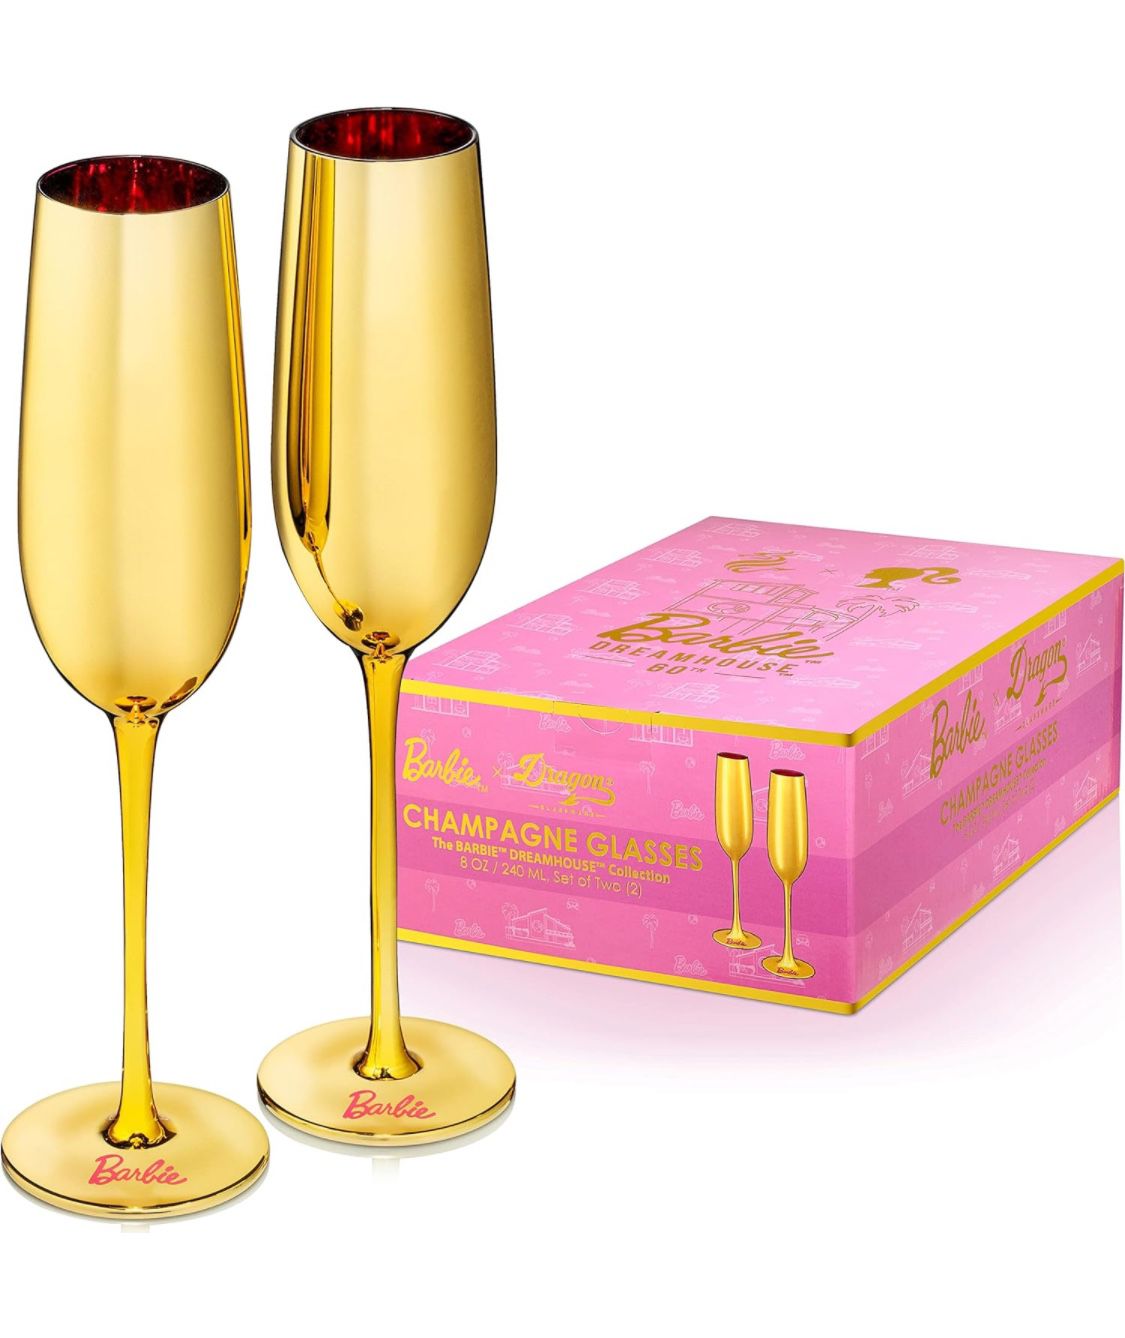 Dragon Glassware X Barbie Champagne Flutes, Barbie Dreamhouse Collection, Gold With Pink Interior Crystal Glass, Mimosa And Cocktail Glasses, 8 Oz Cap